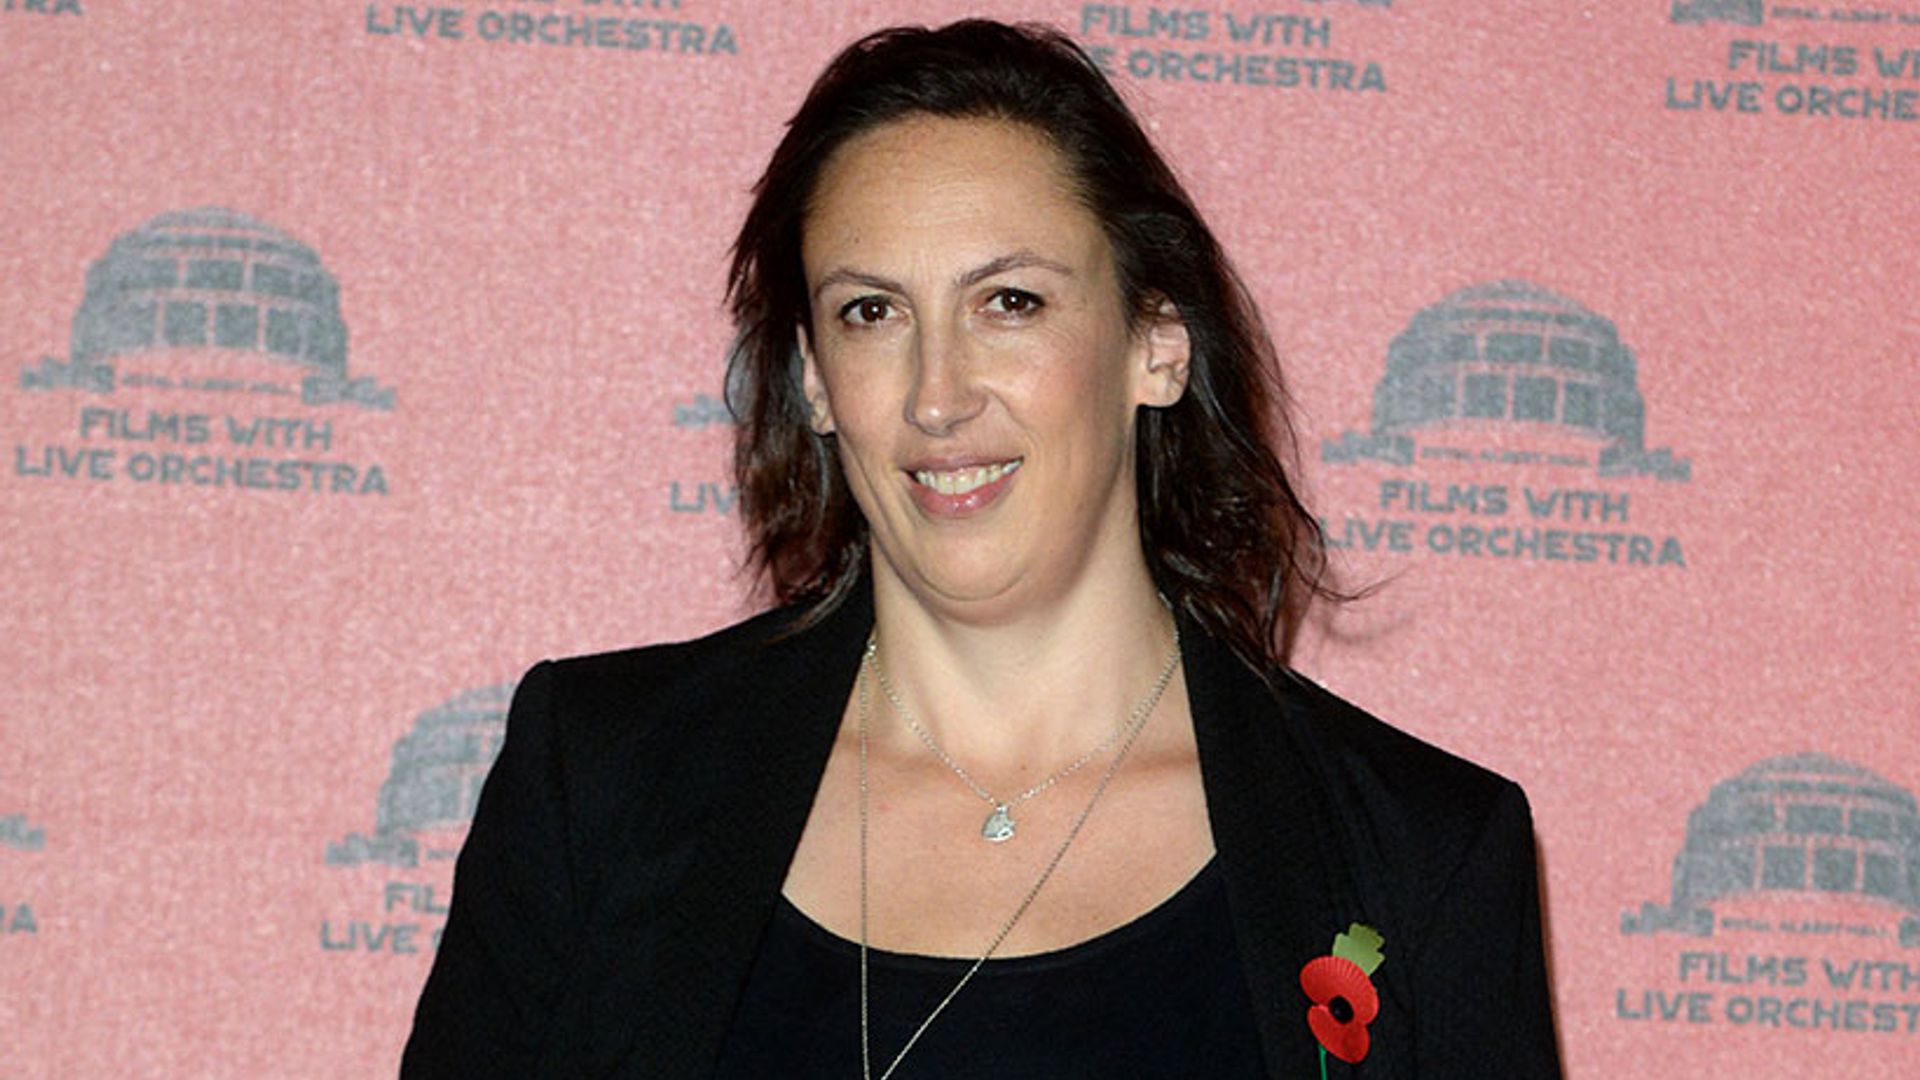 Miranda Hart spends Valentine's Day offering advice to people feeling lonely